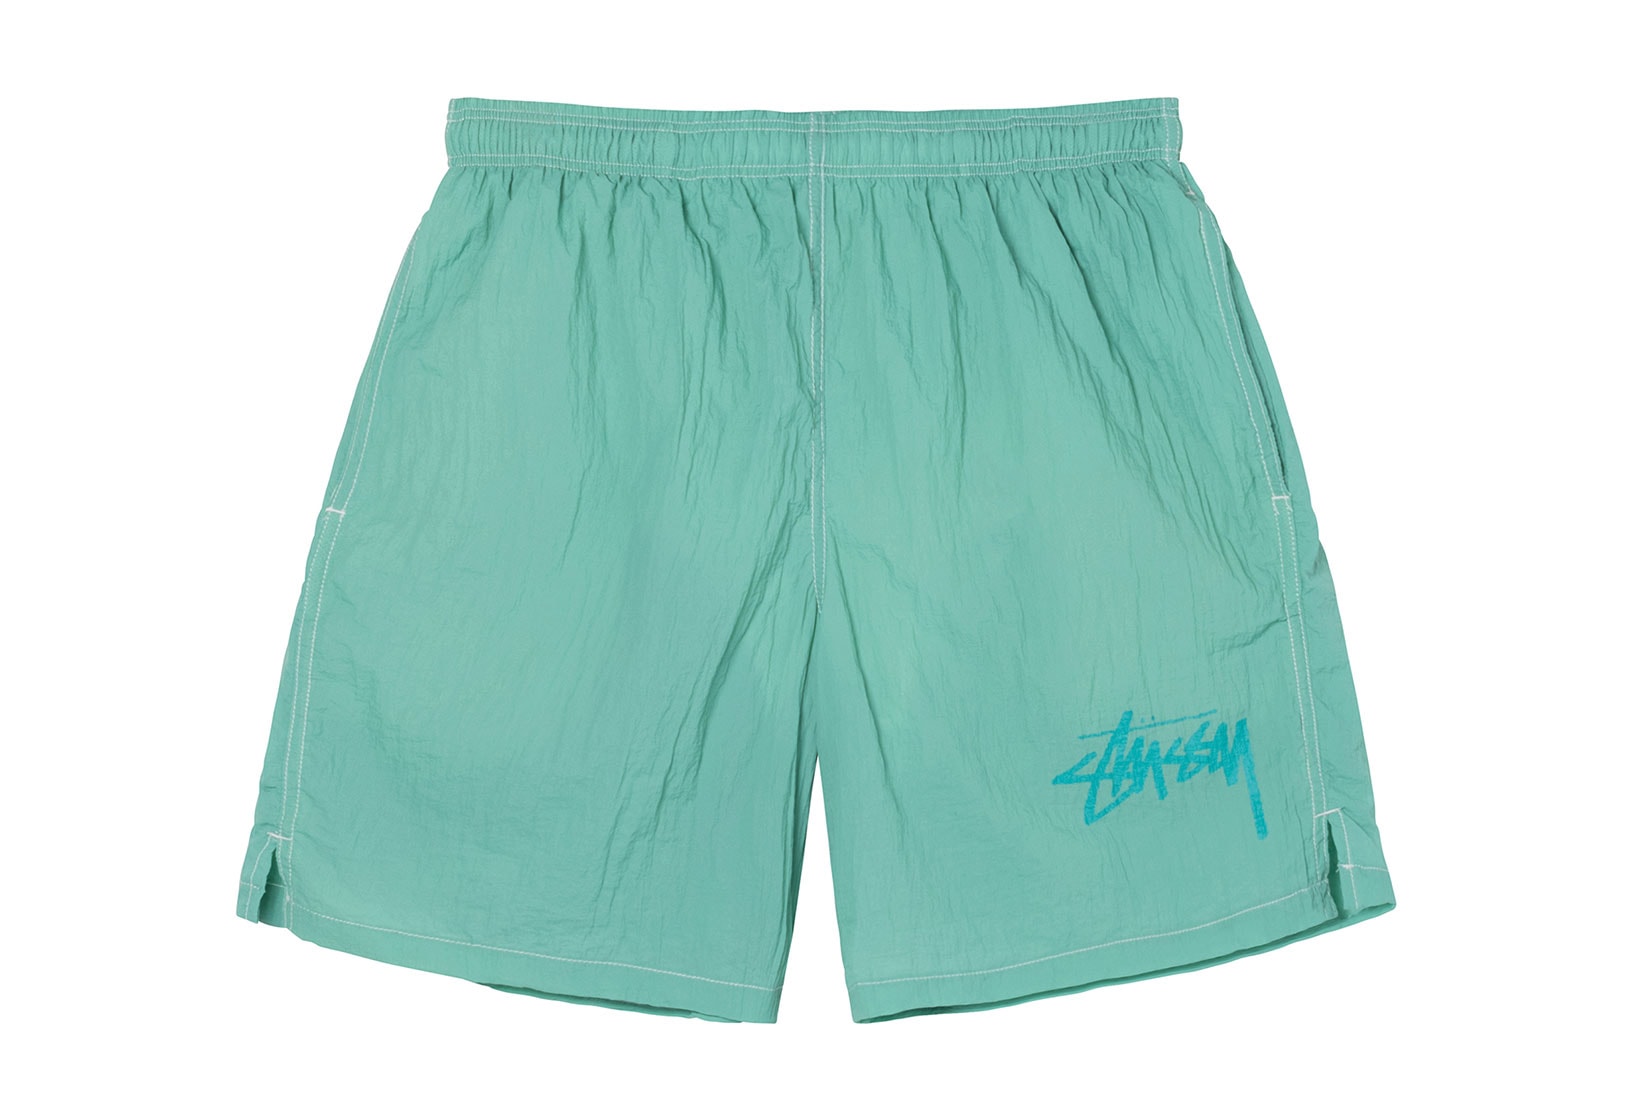 Stussy x Our Legacy WORK SHOP Summer 2021 Collab